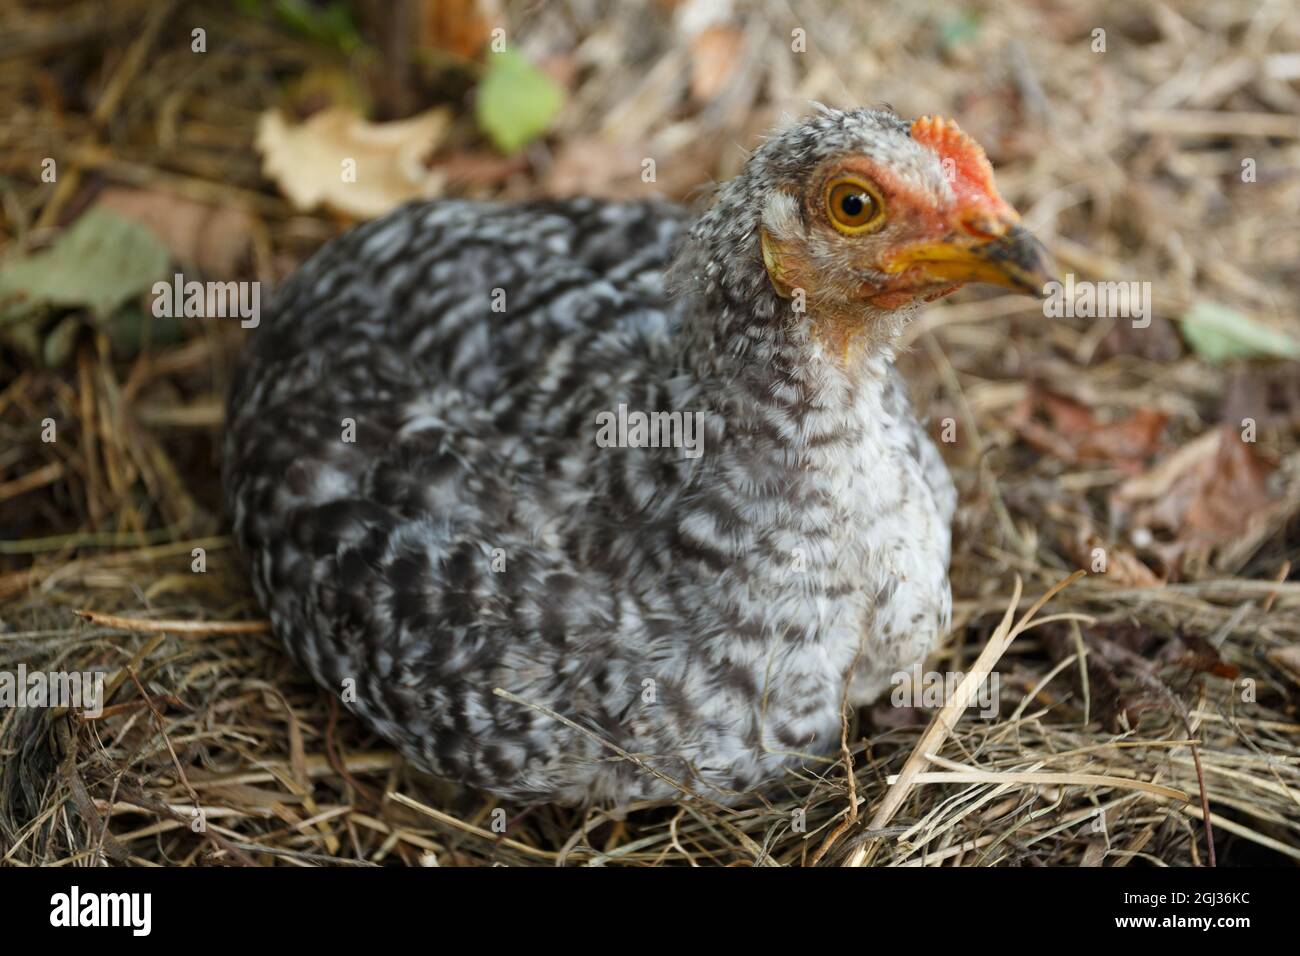 Grey chick in the garden, close-up Stock Photo